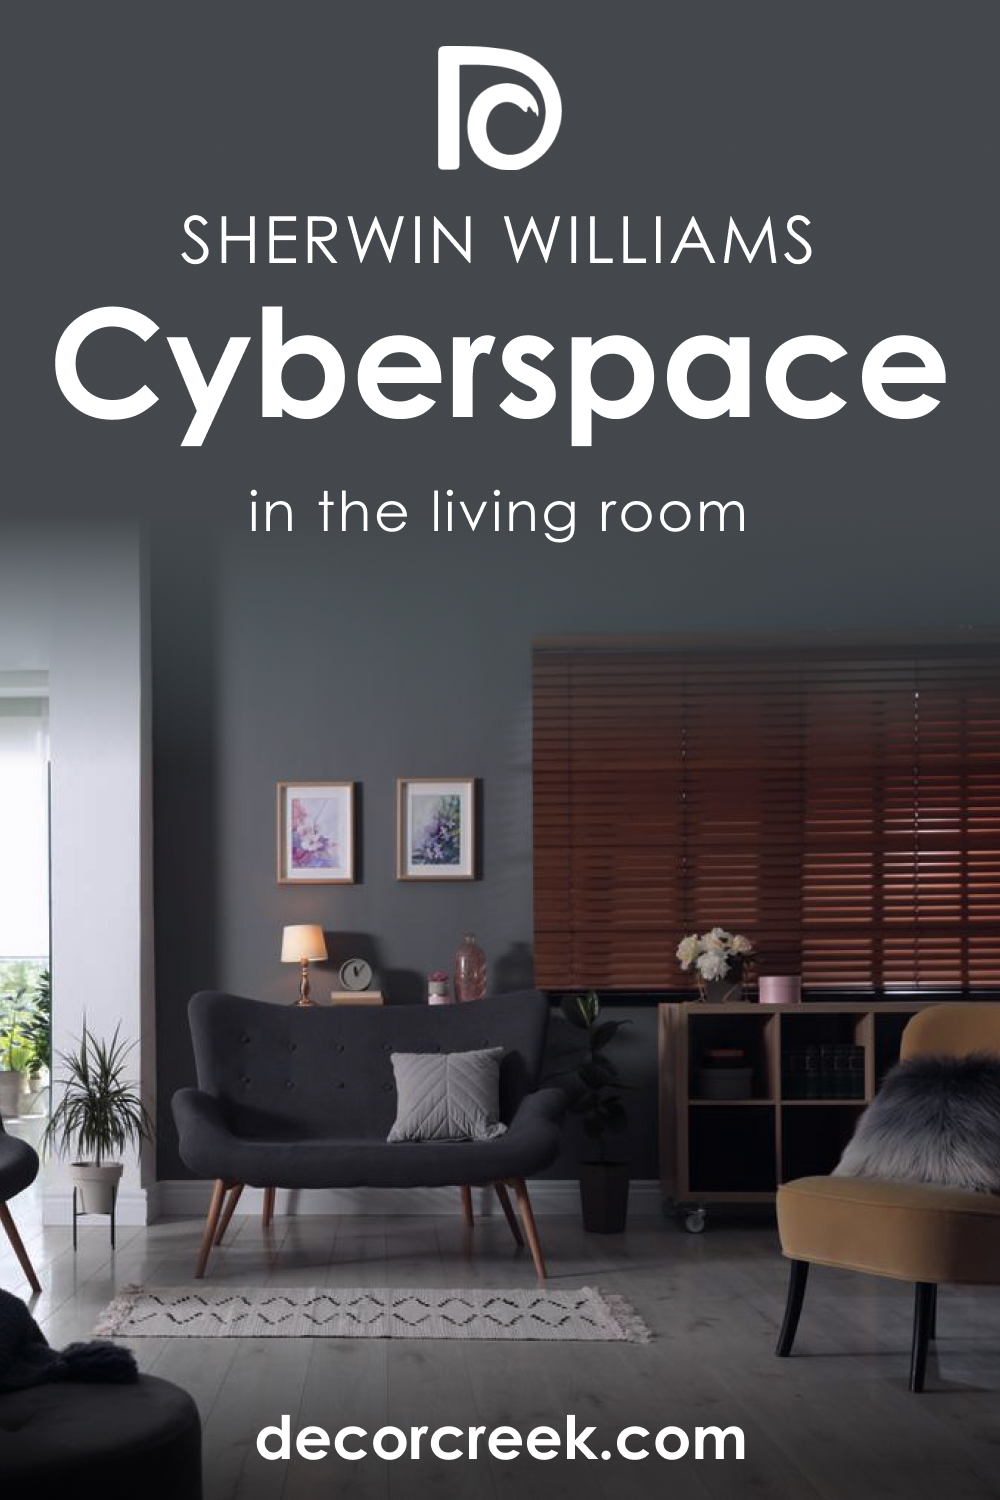 How to Use SW 7076 Cyberspace in the Living Room?